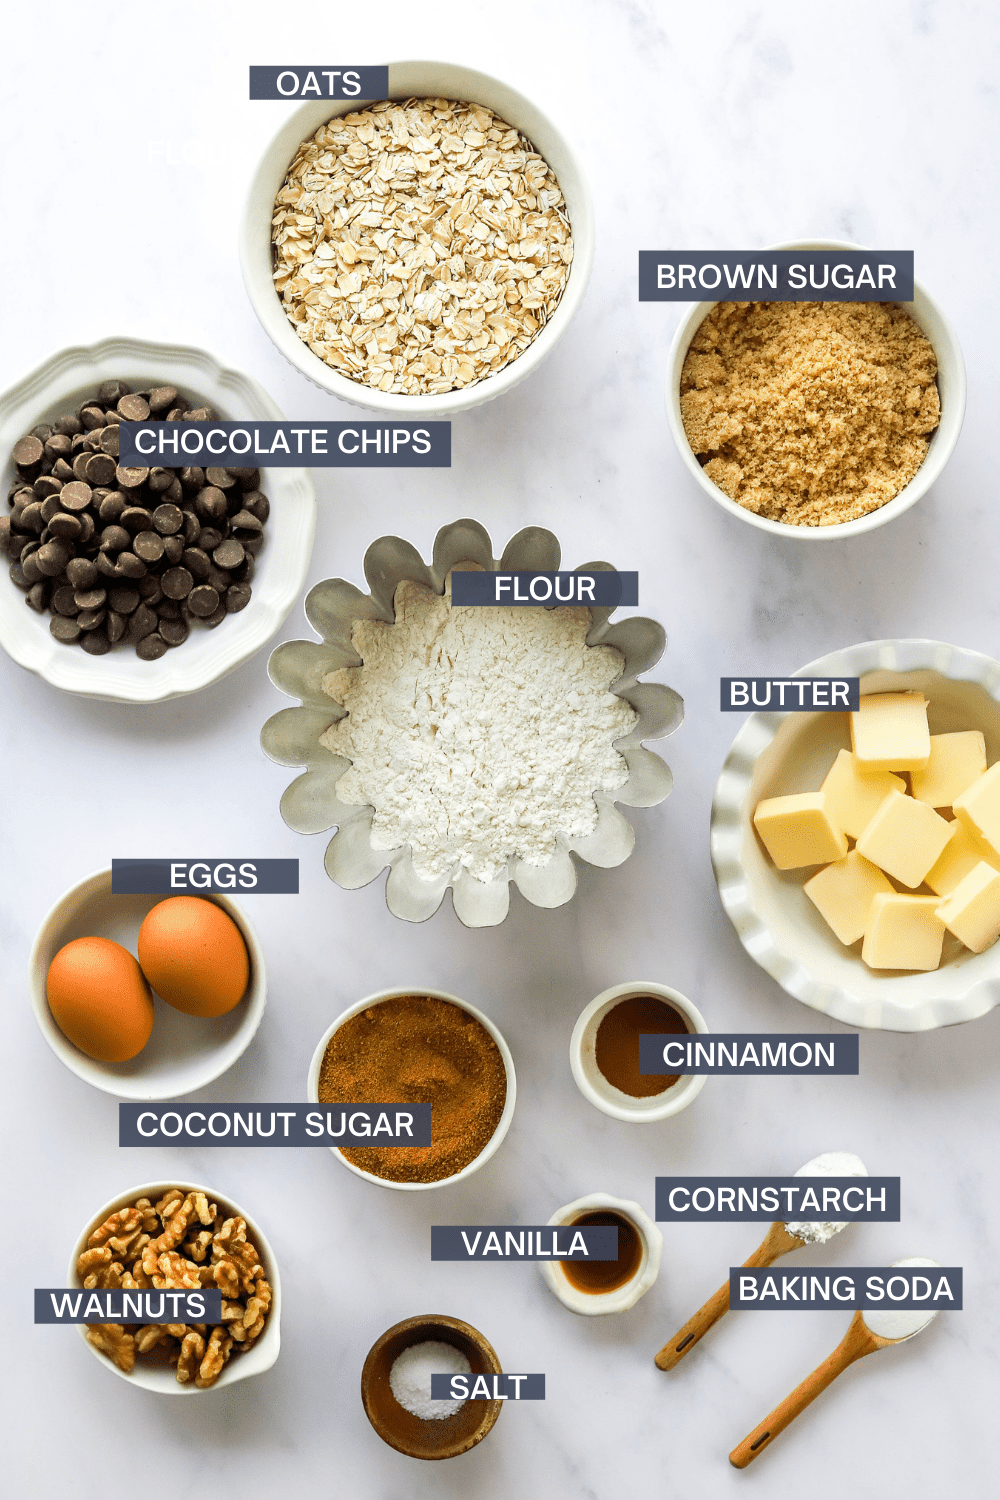 A bowl of oats with a bowl of chocolate chips, bowl of brown sugar, flour, cubed butter, whole eggs, cinnamon, vanilla, walnuts, cornstarch and baking soda in front of it with labels for each ingredients above it. 